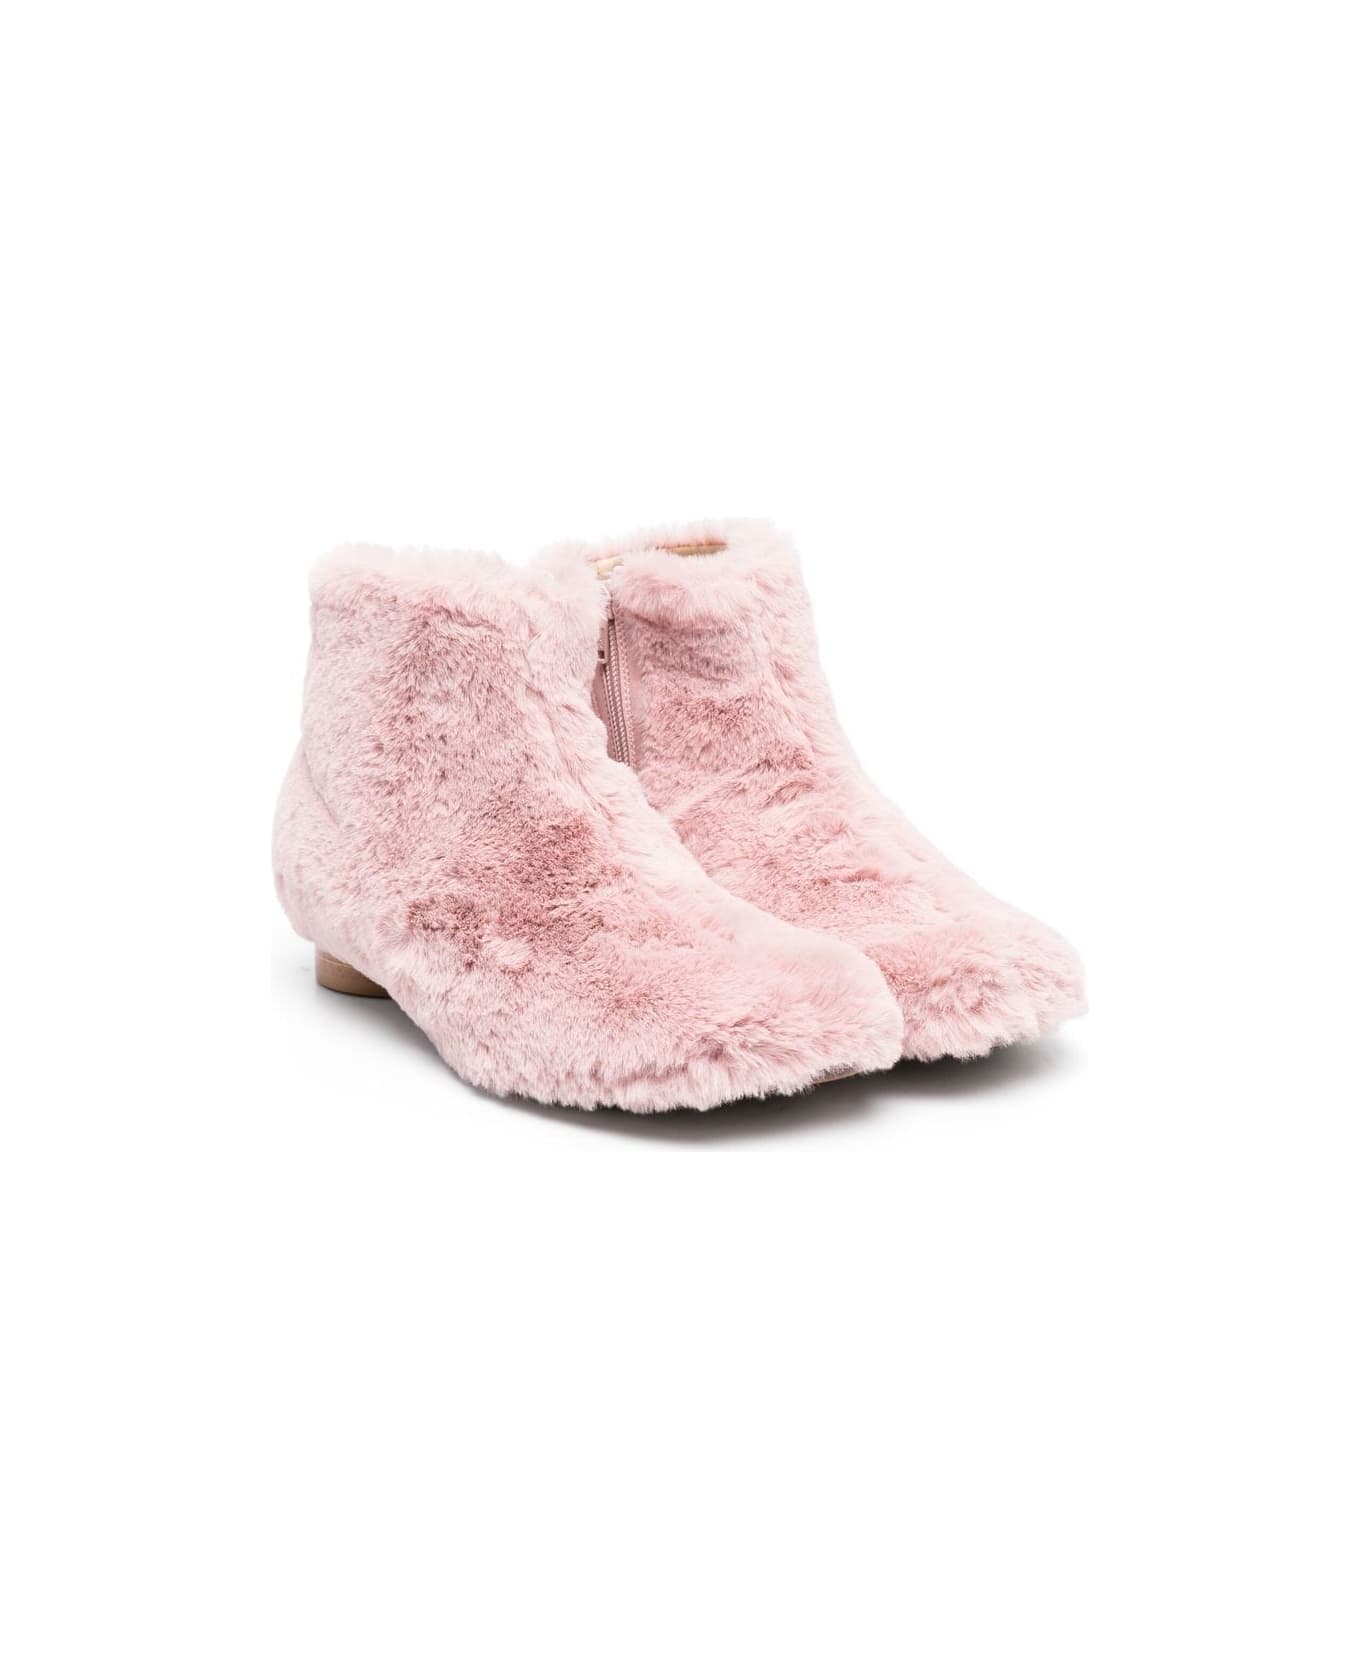 MM6 Maison Margiela Pink Ankle Boots - Pink